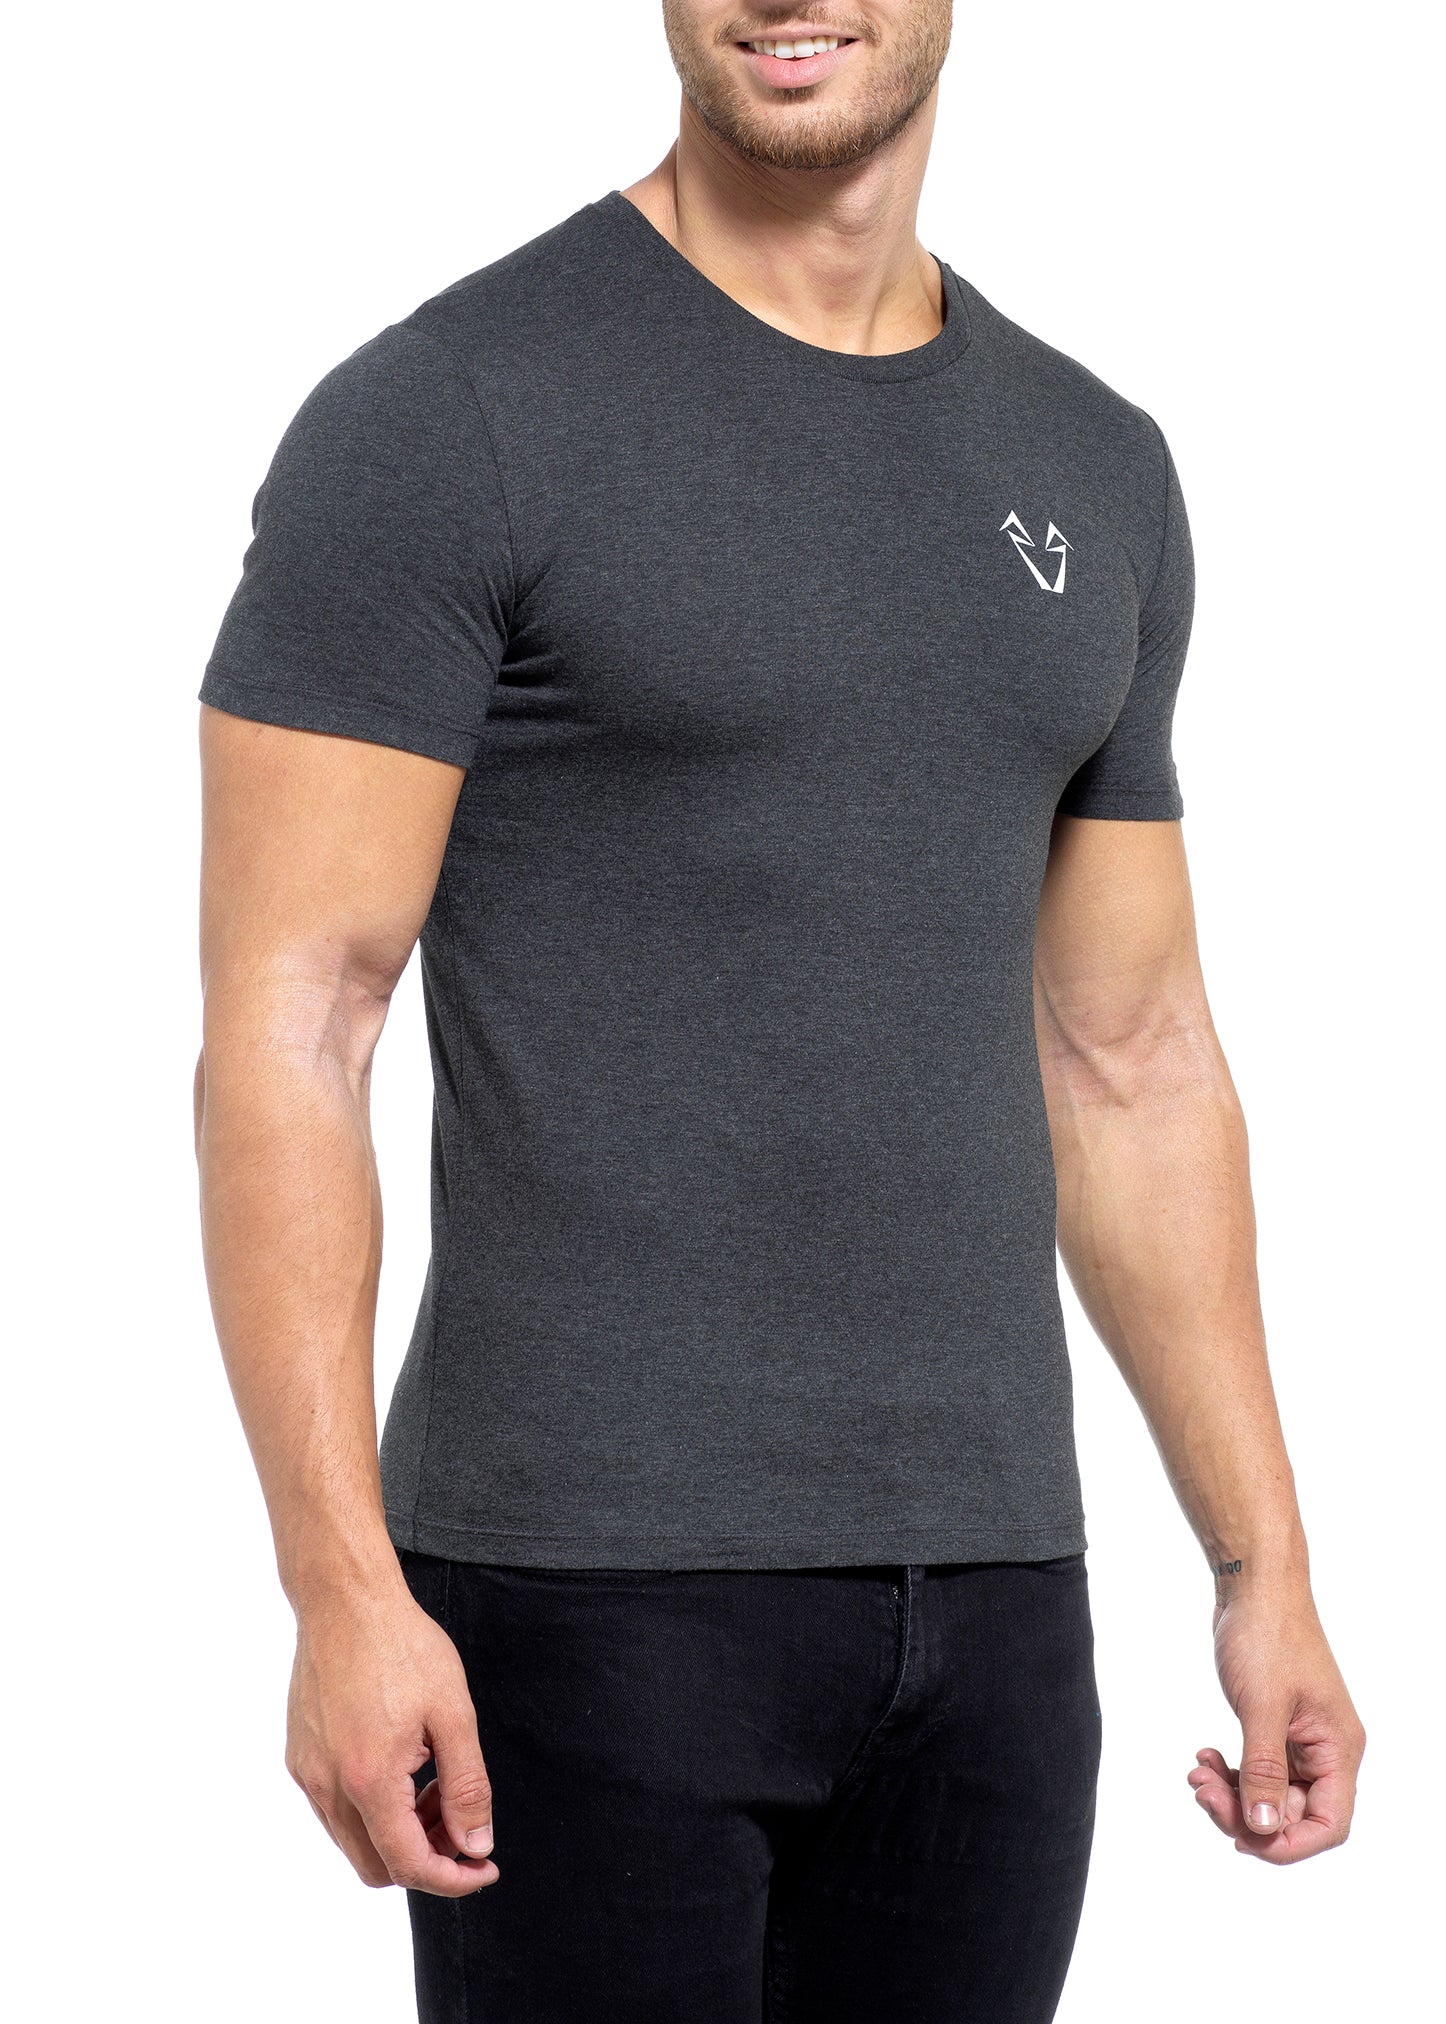 Mens Muscle Fit Grey T Shirt